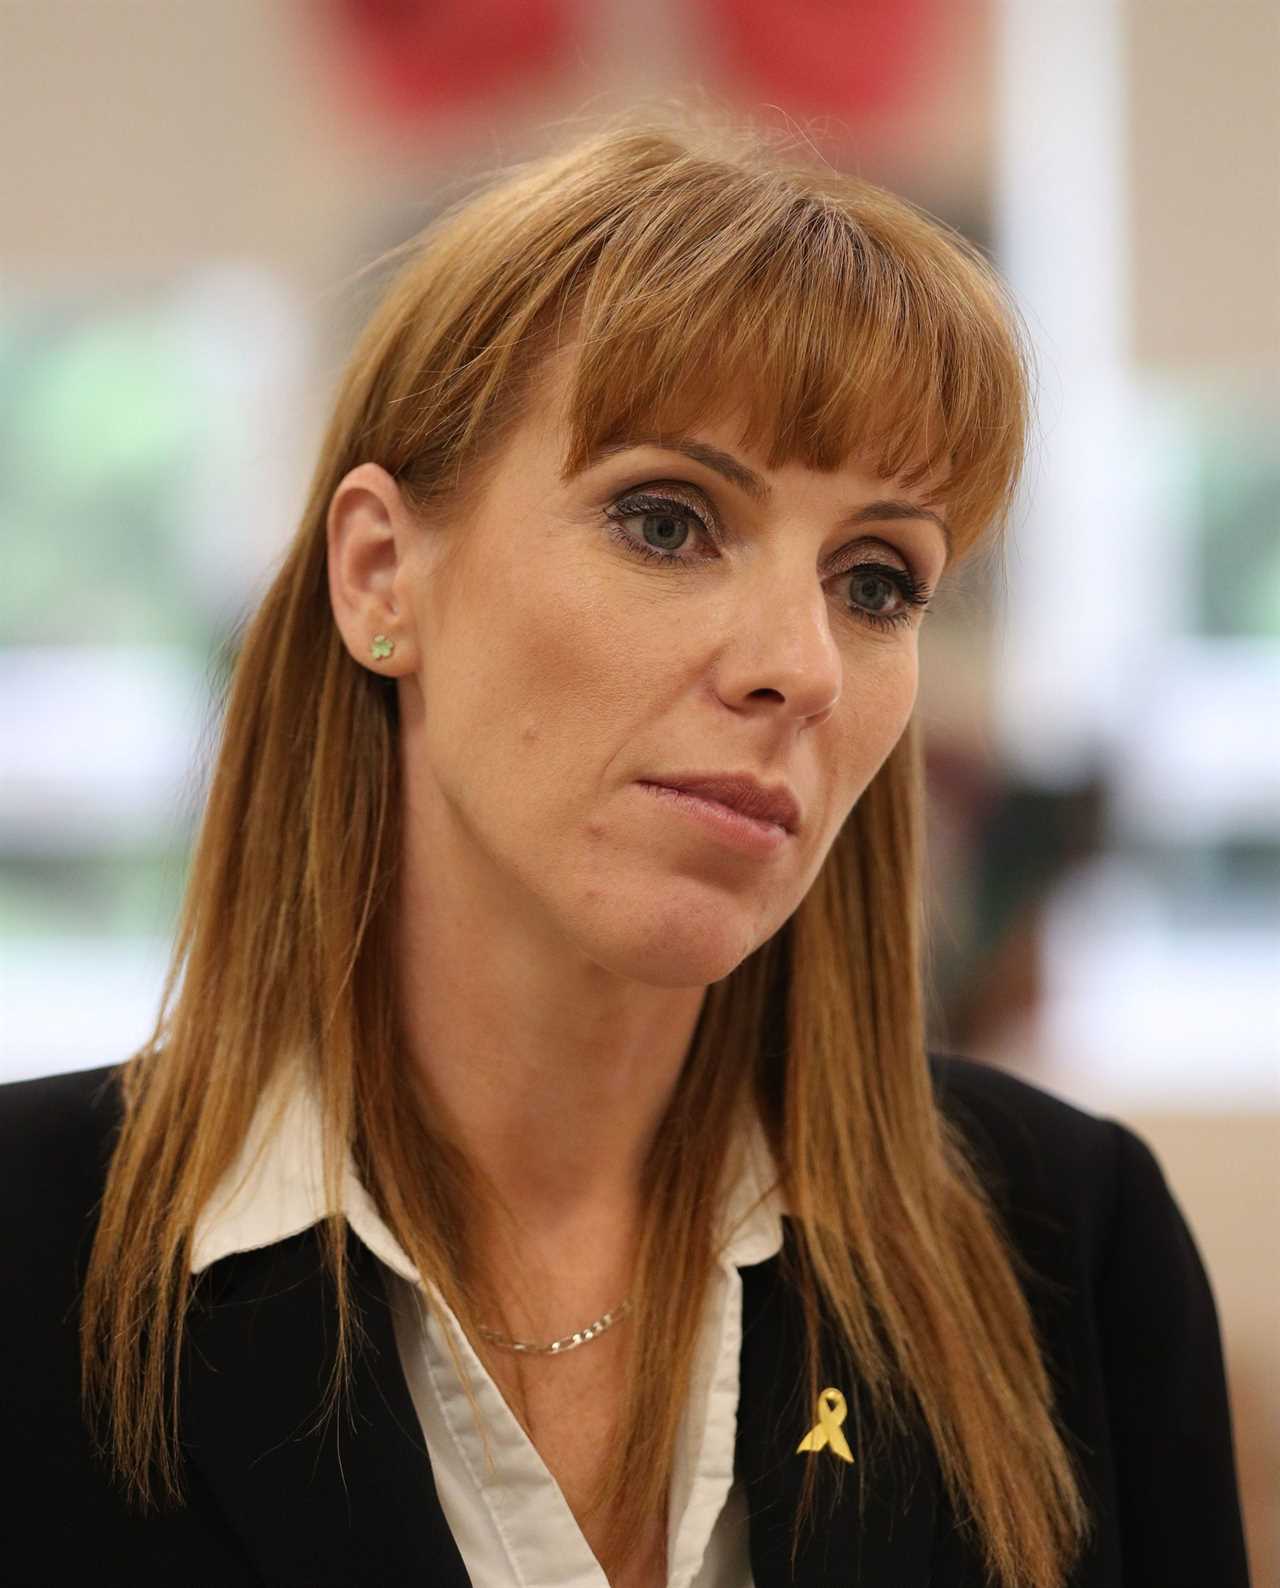 Labour’s deputy leader Angela Rayner claimed £249 personalised Apple AirPods on expenses